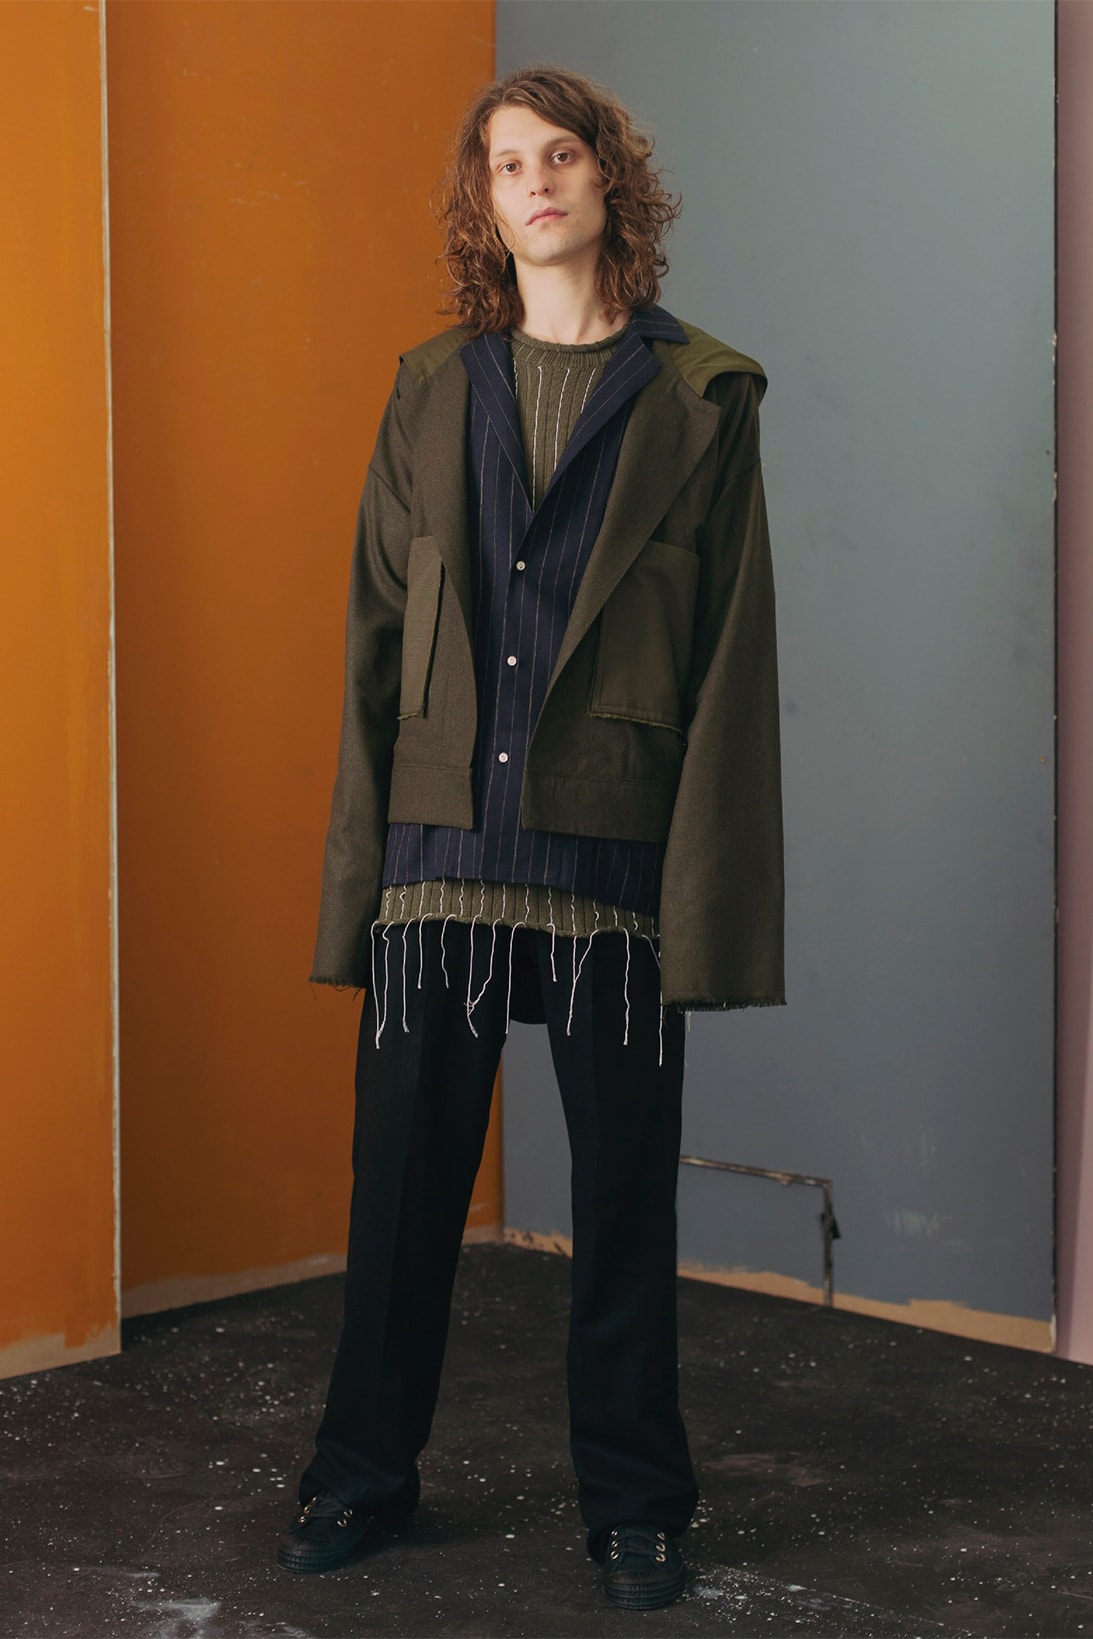 JAMES STUDIO 2018 Spring Summer Collection lookbook menswear suits suiting denim sweaters outerwear jeans jackets coats